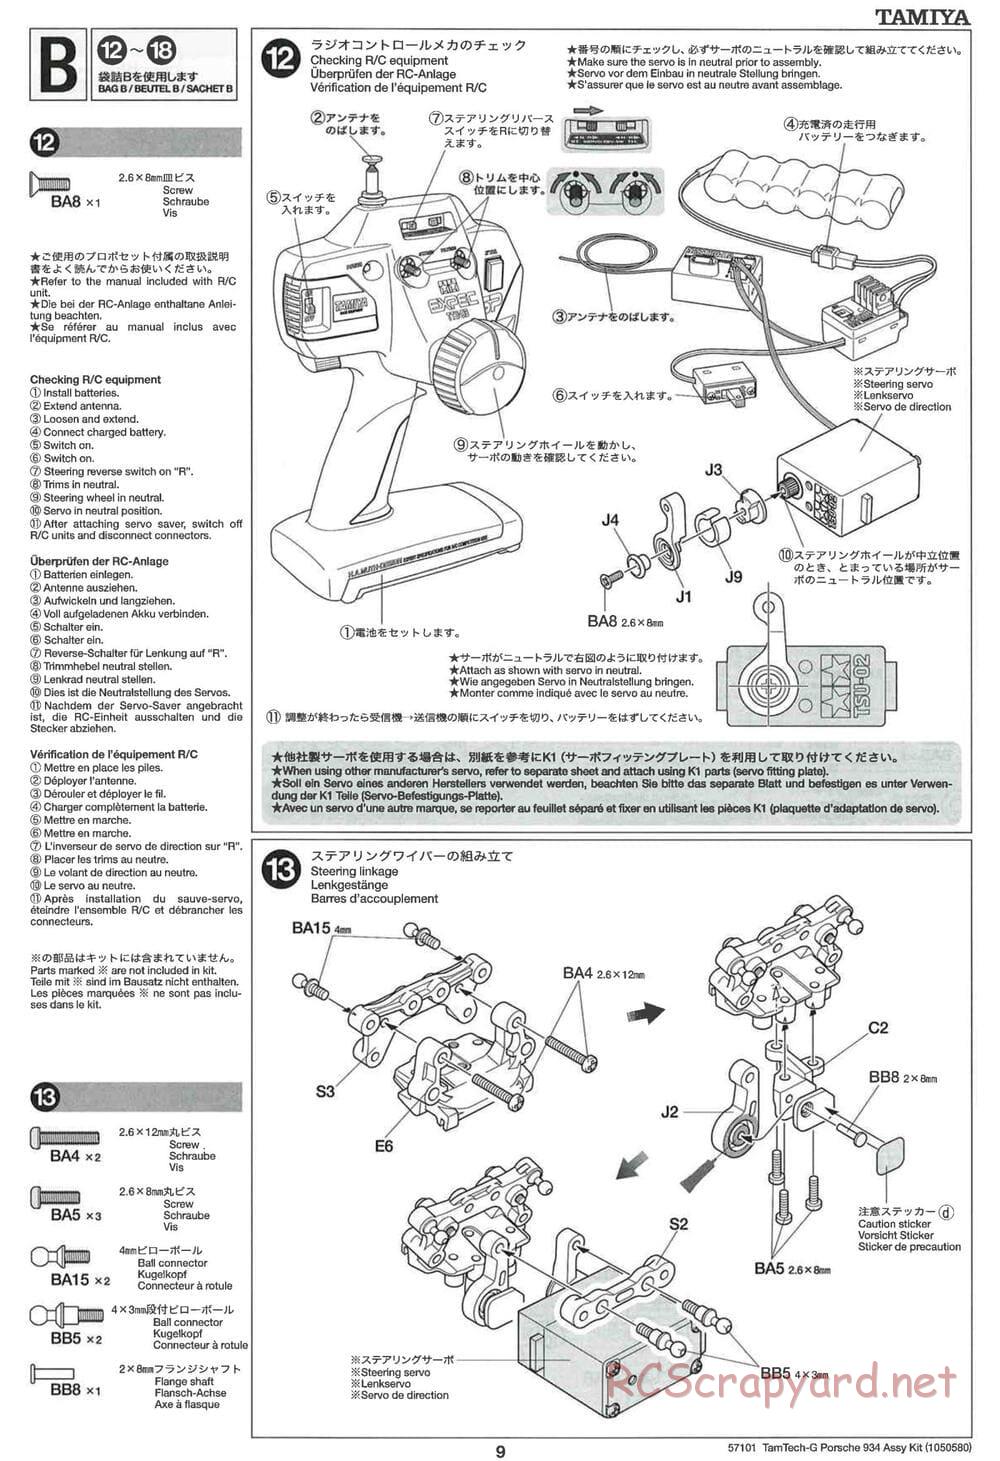 Tamiya - Porsche Turbo RSR - GT-01 Chassis - Manual - Page 9